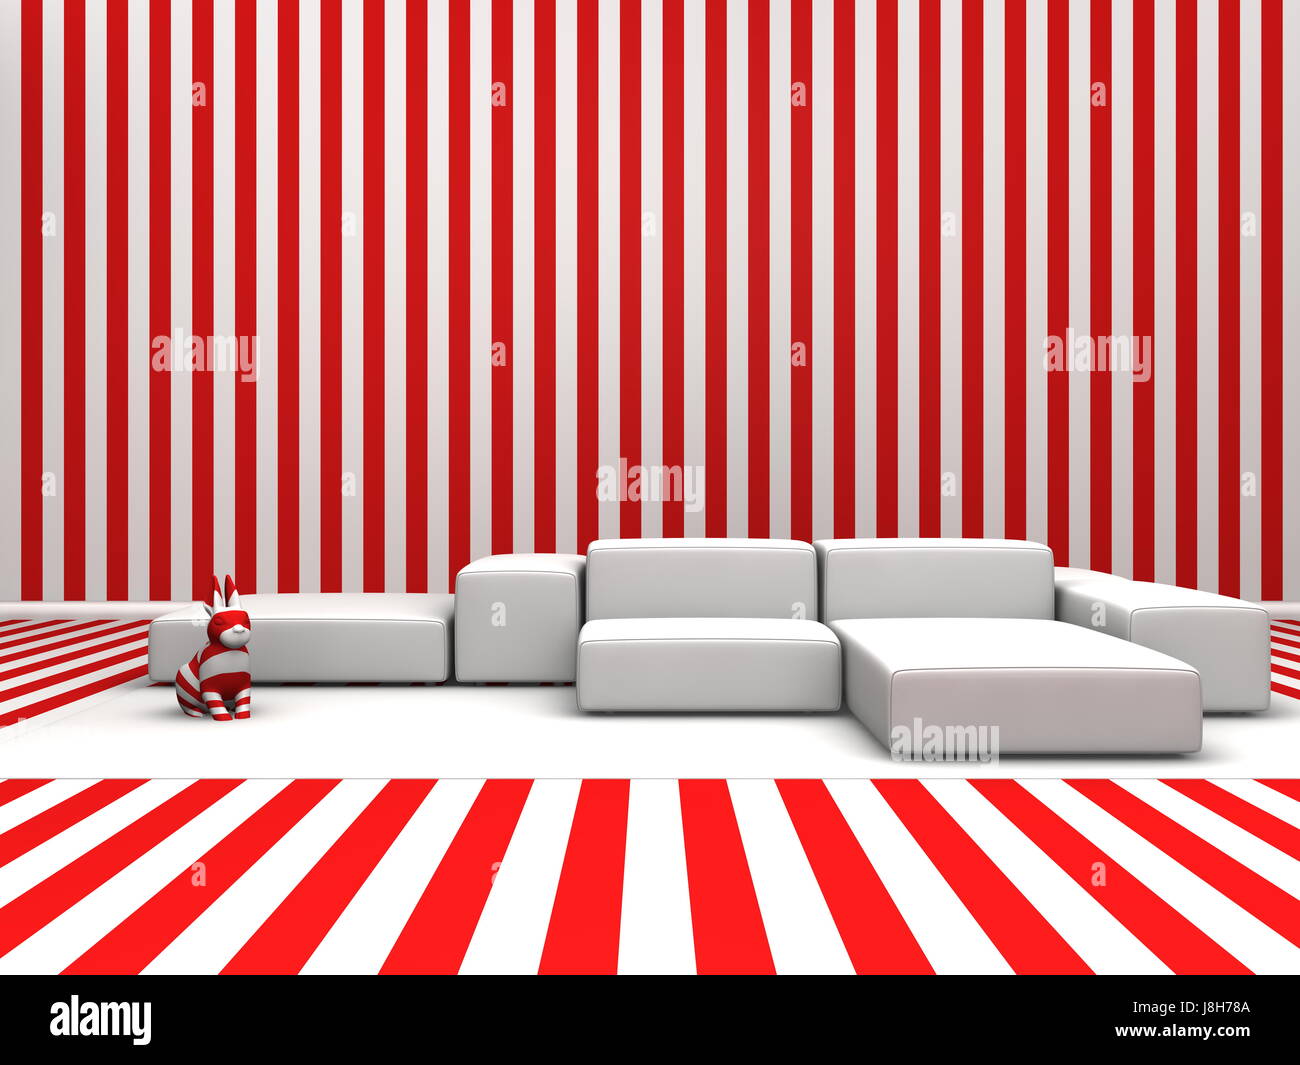 model, design, project, concept, plan, draft, modern, modernity, couch, sofa, Stock Photo